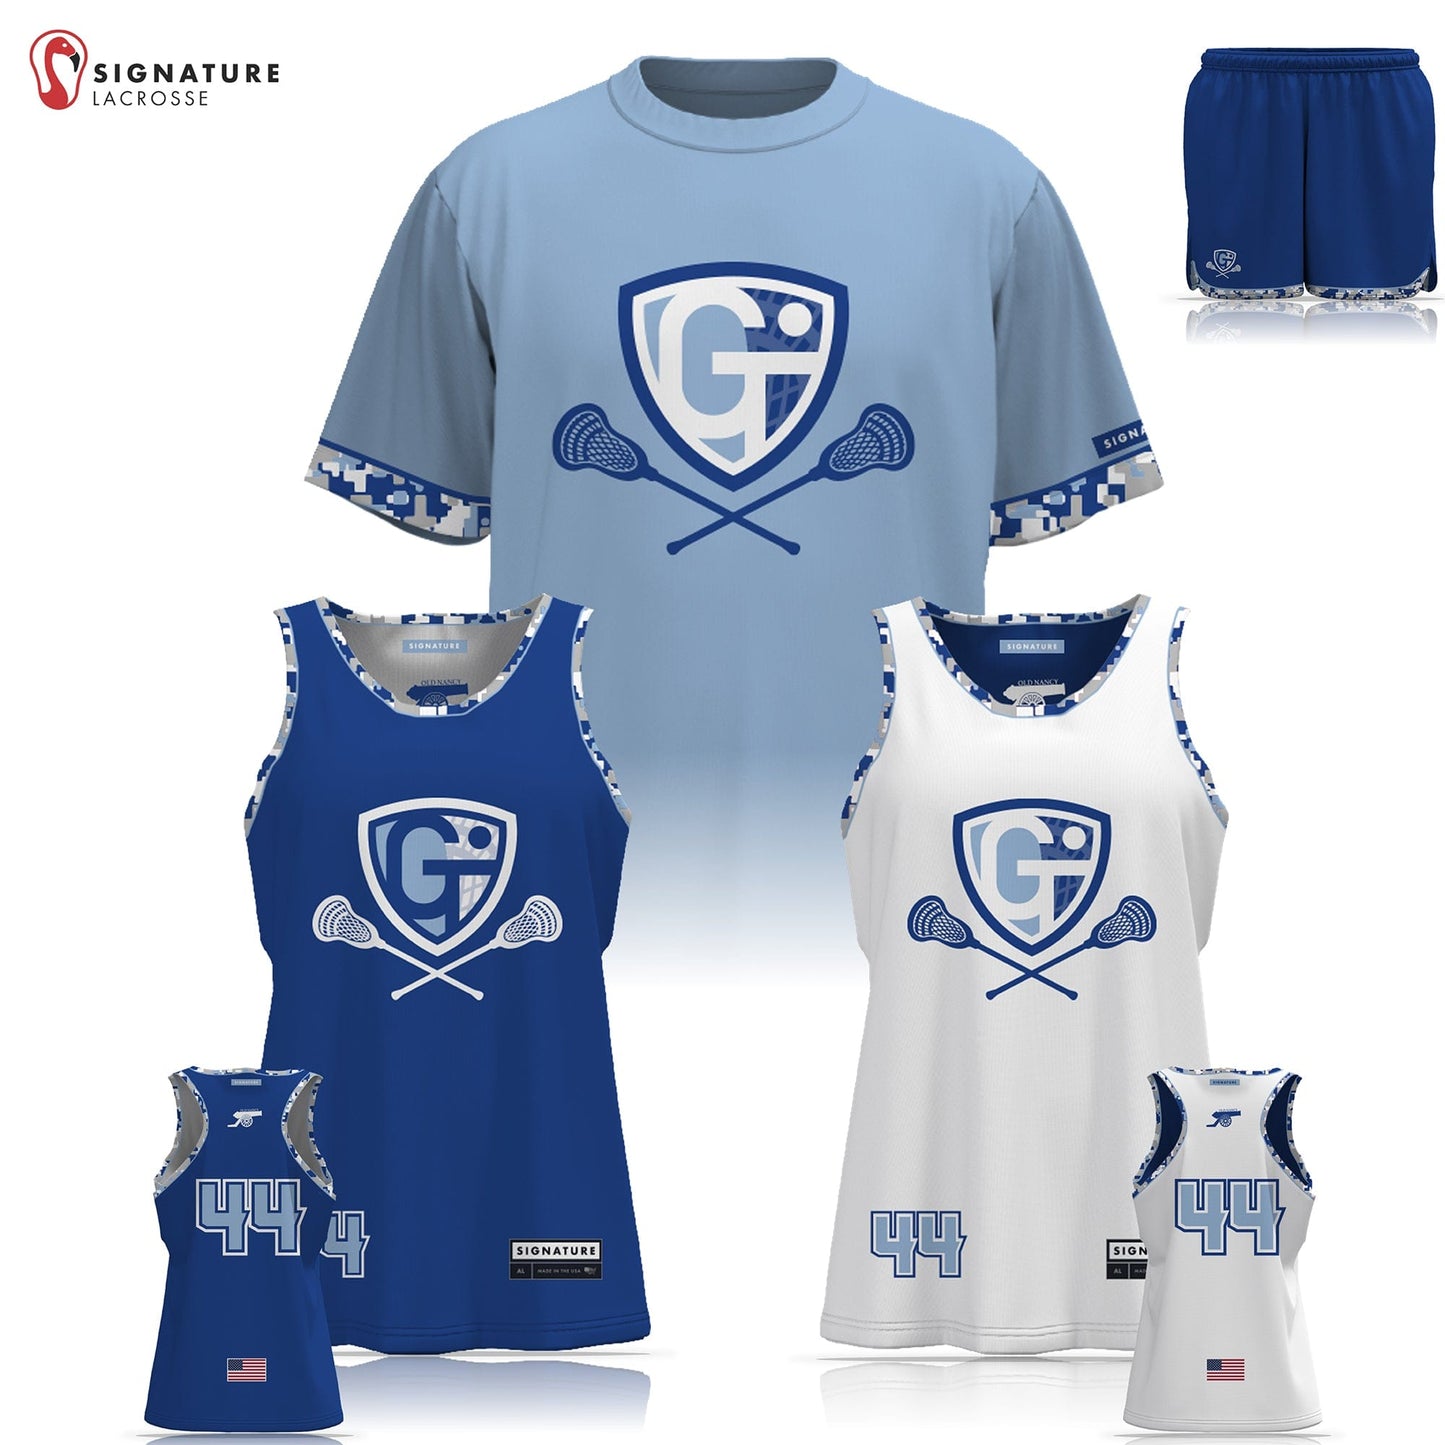 Georgetown-Triton Youth Lacrosse Women's 3 Piece Player Game Package: 3-4 Signature Lacrosse